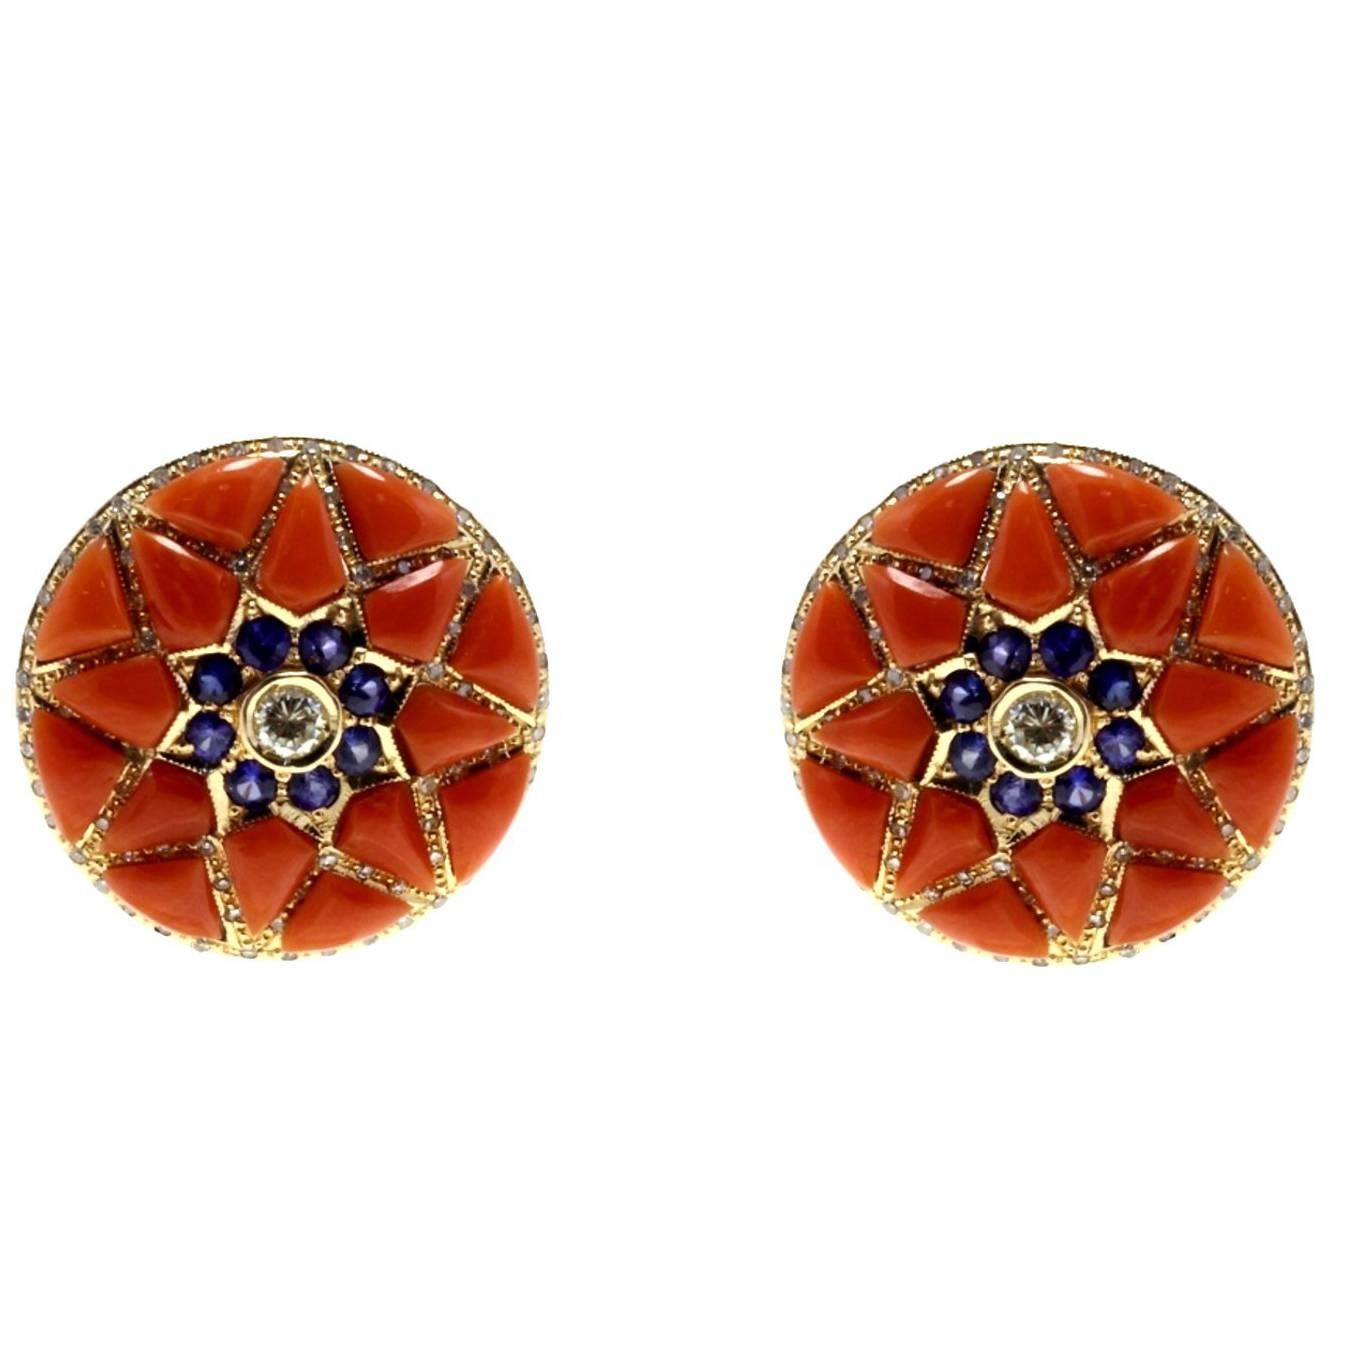 Diamonds, Blue Sapphire Flowers, Red Coral Flowers, Rose Gold Clip-on Earrings For Sale